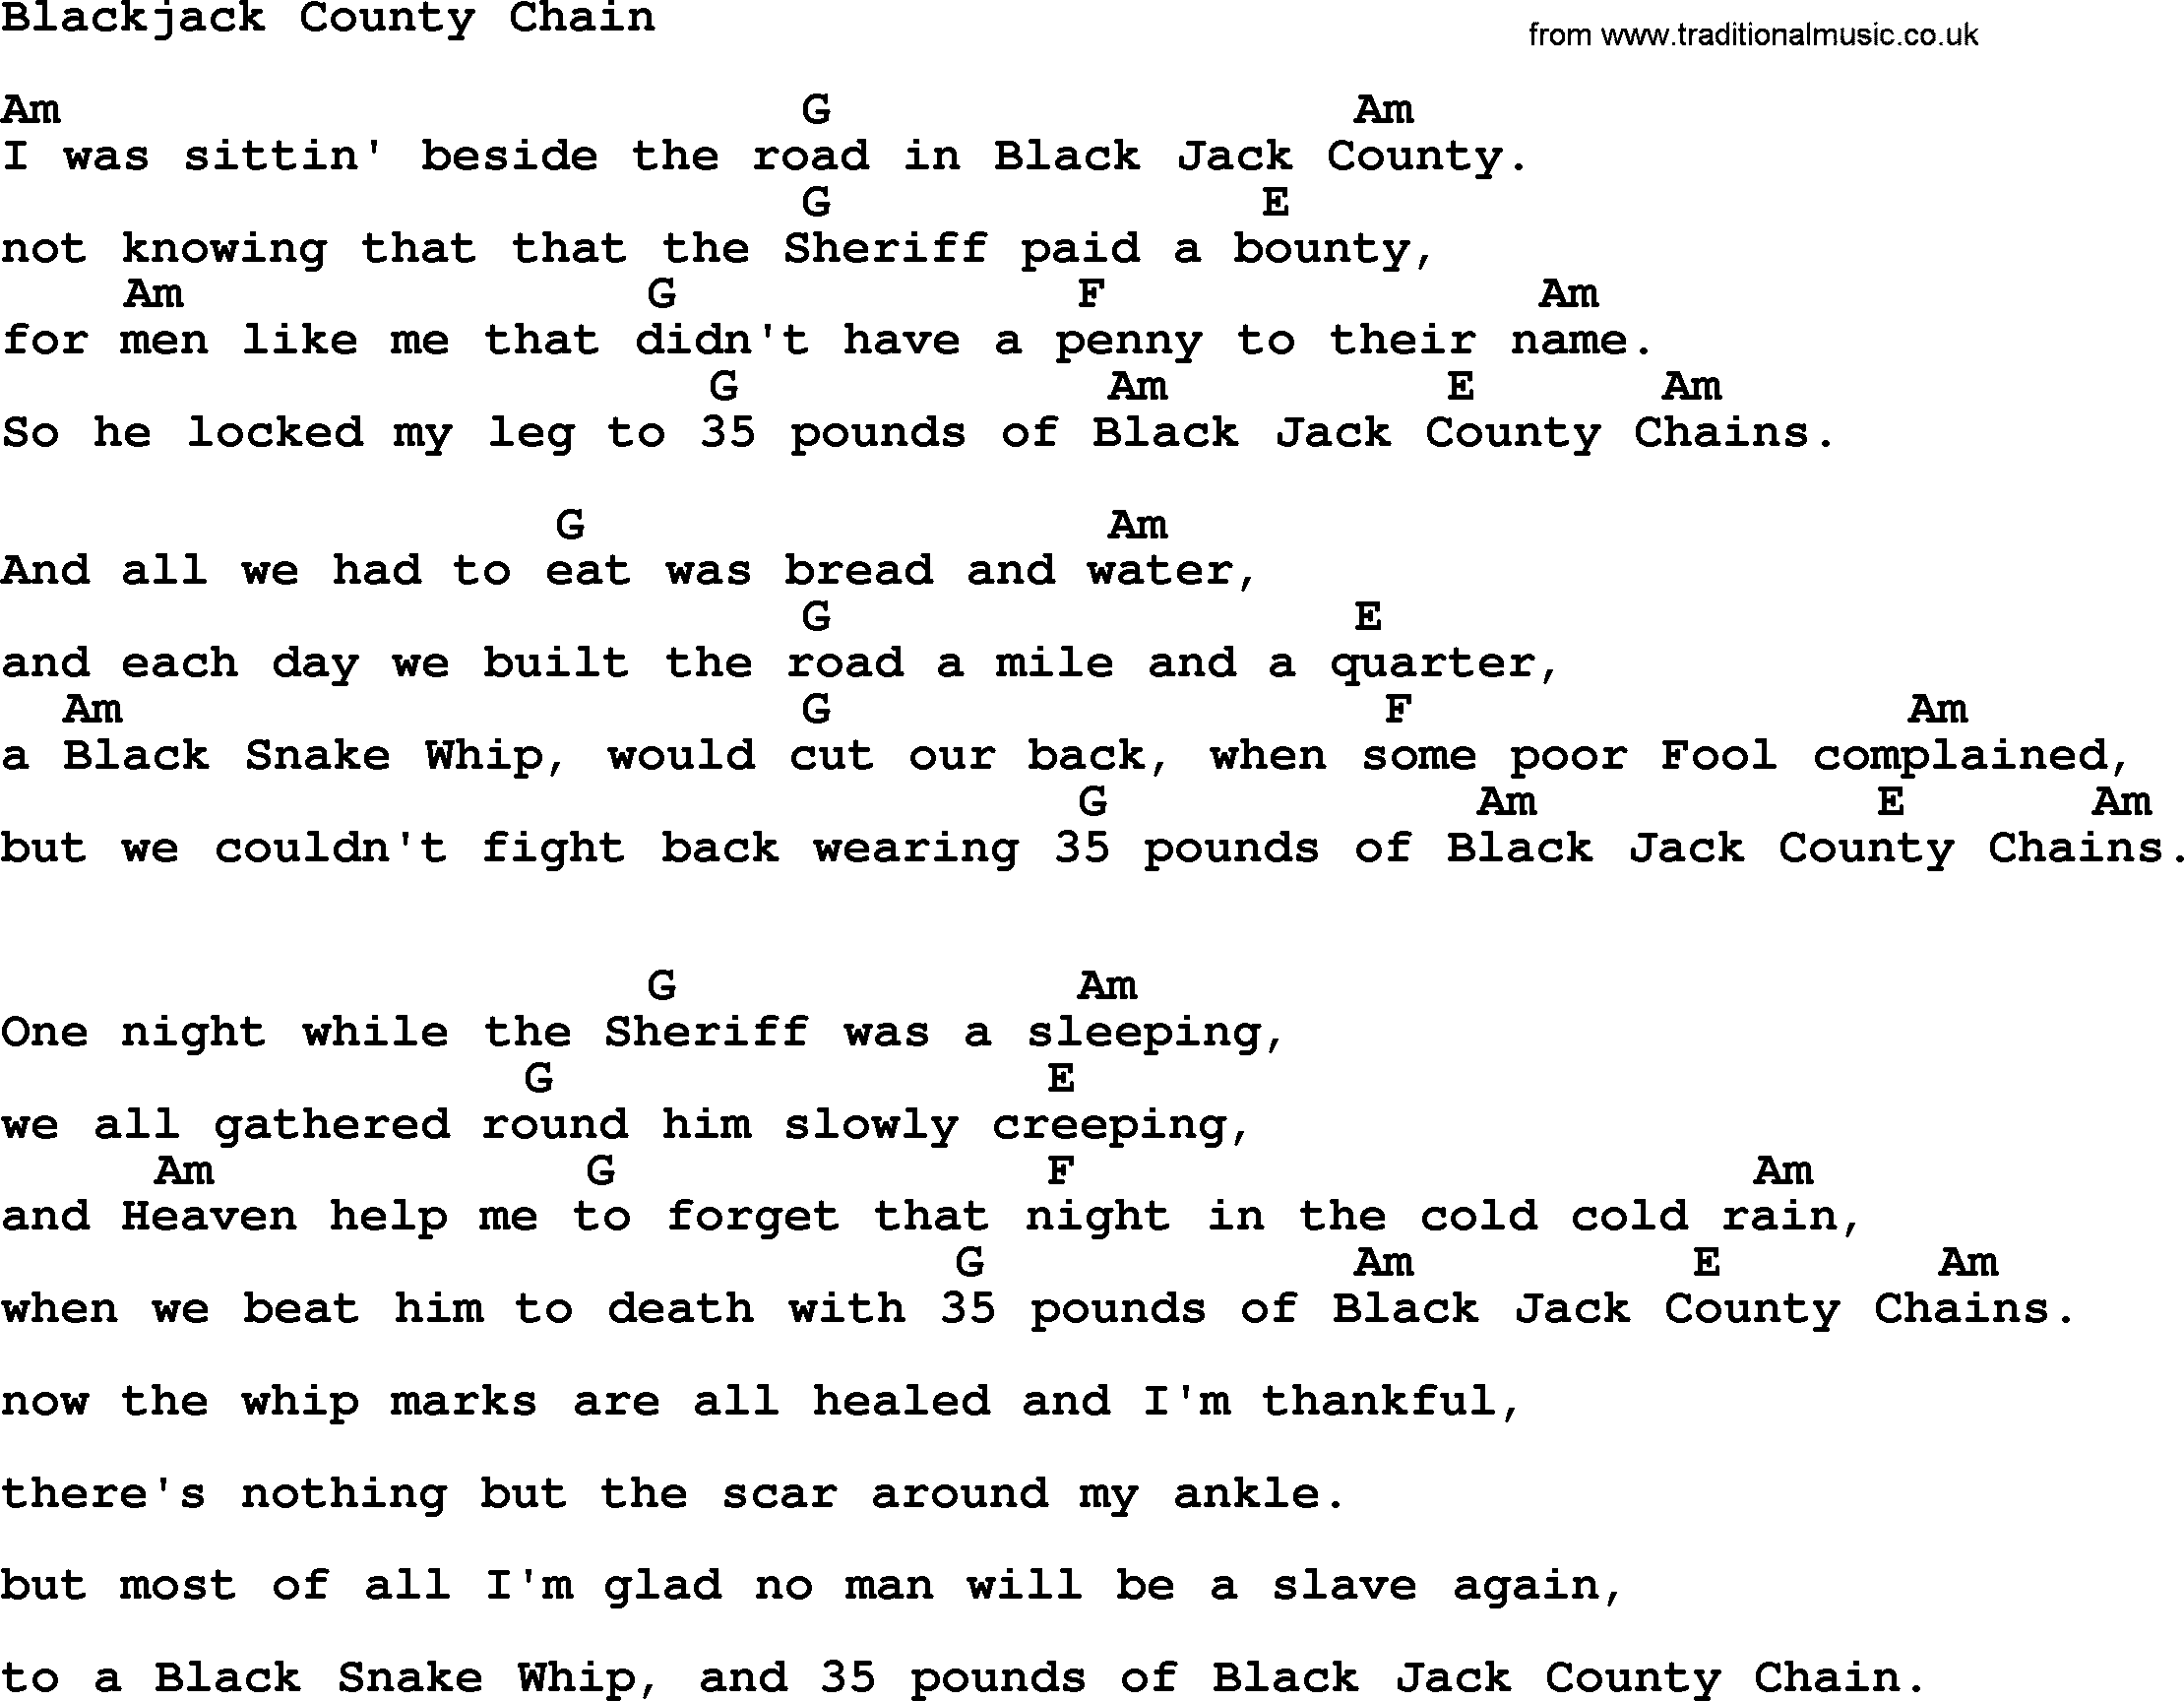 Willie Nelson song: Blackjack County Chain, lyrics and chords